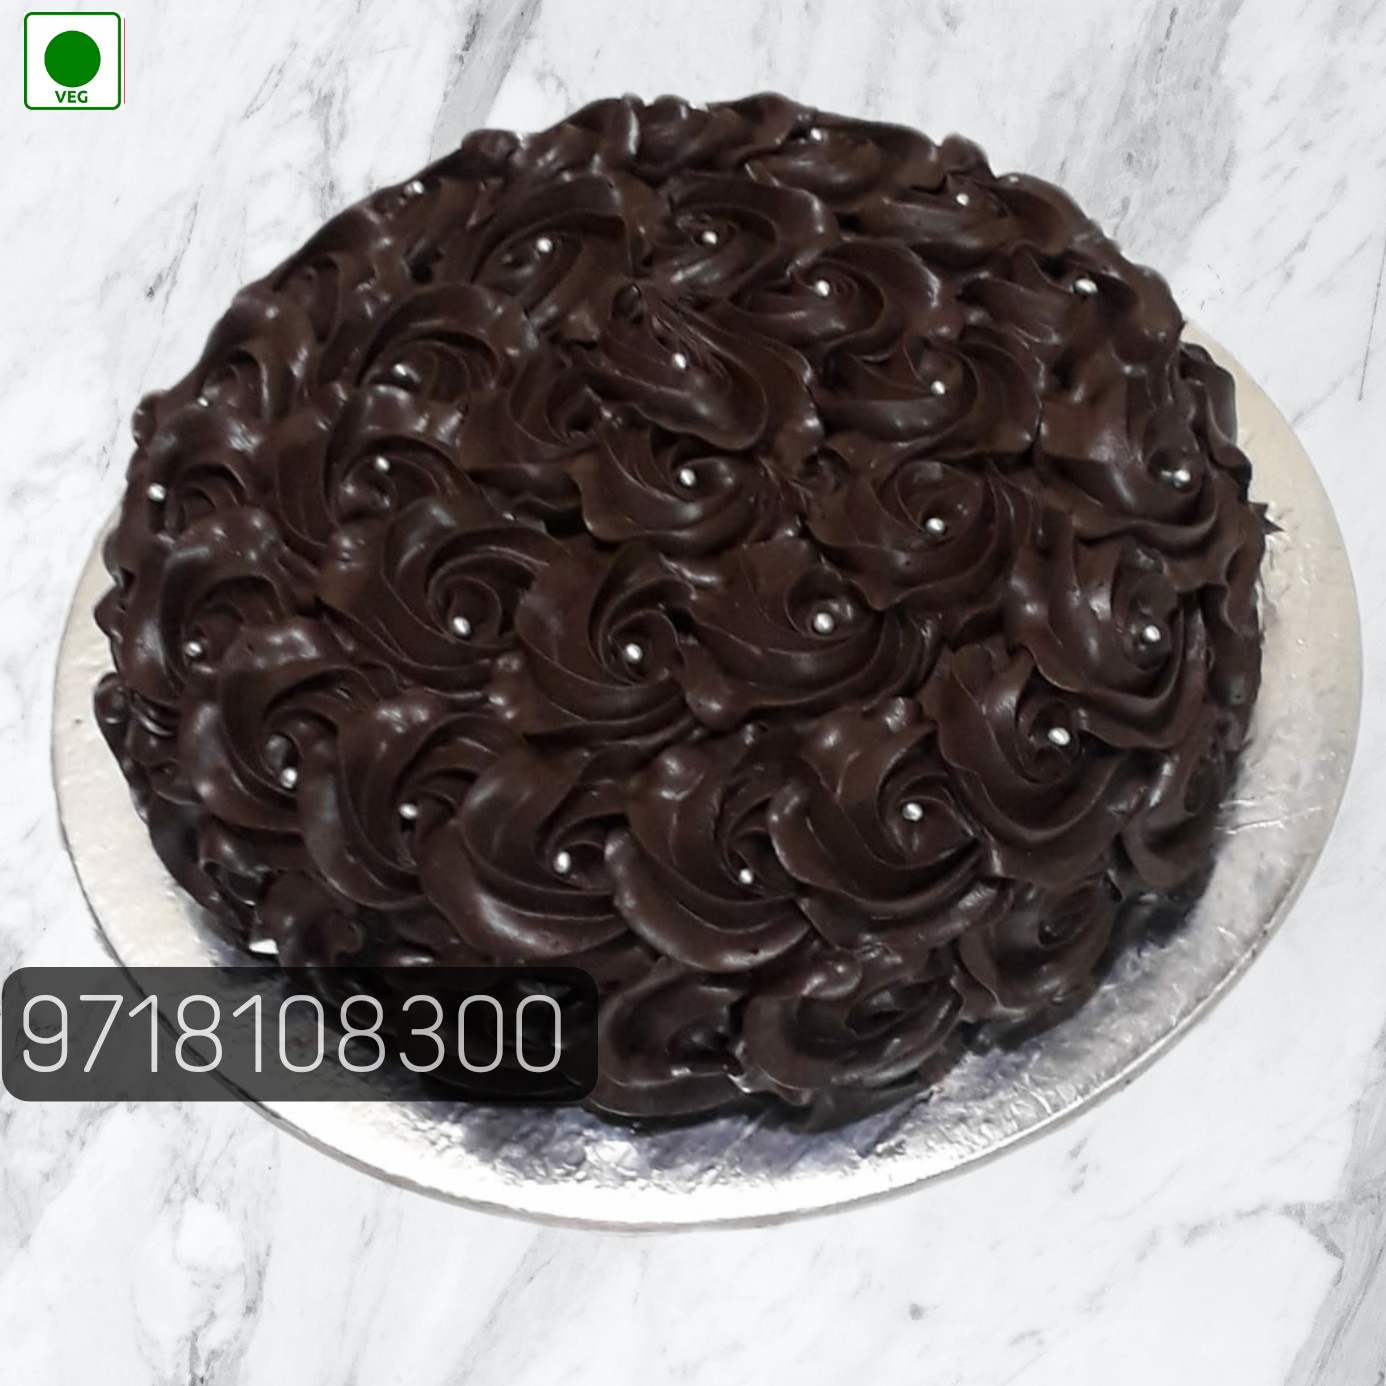 Chocolate cake for big boy ..... - Svaad - Flavours Infusion | Facebook